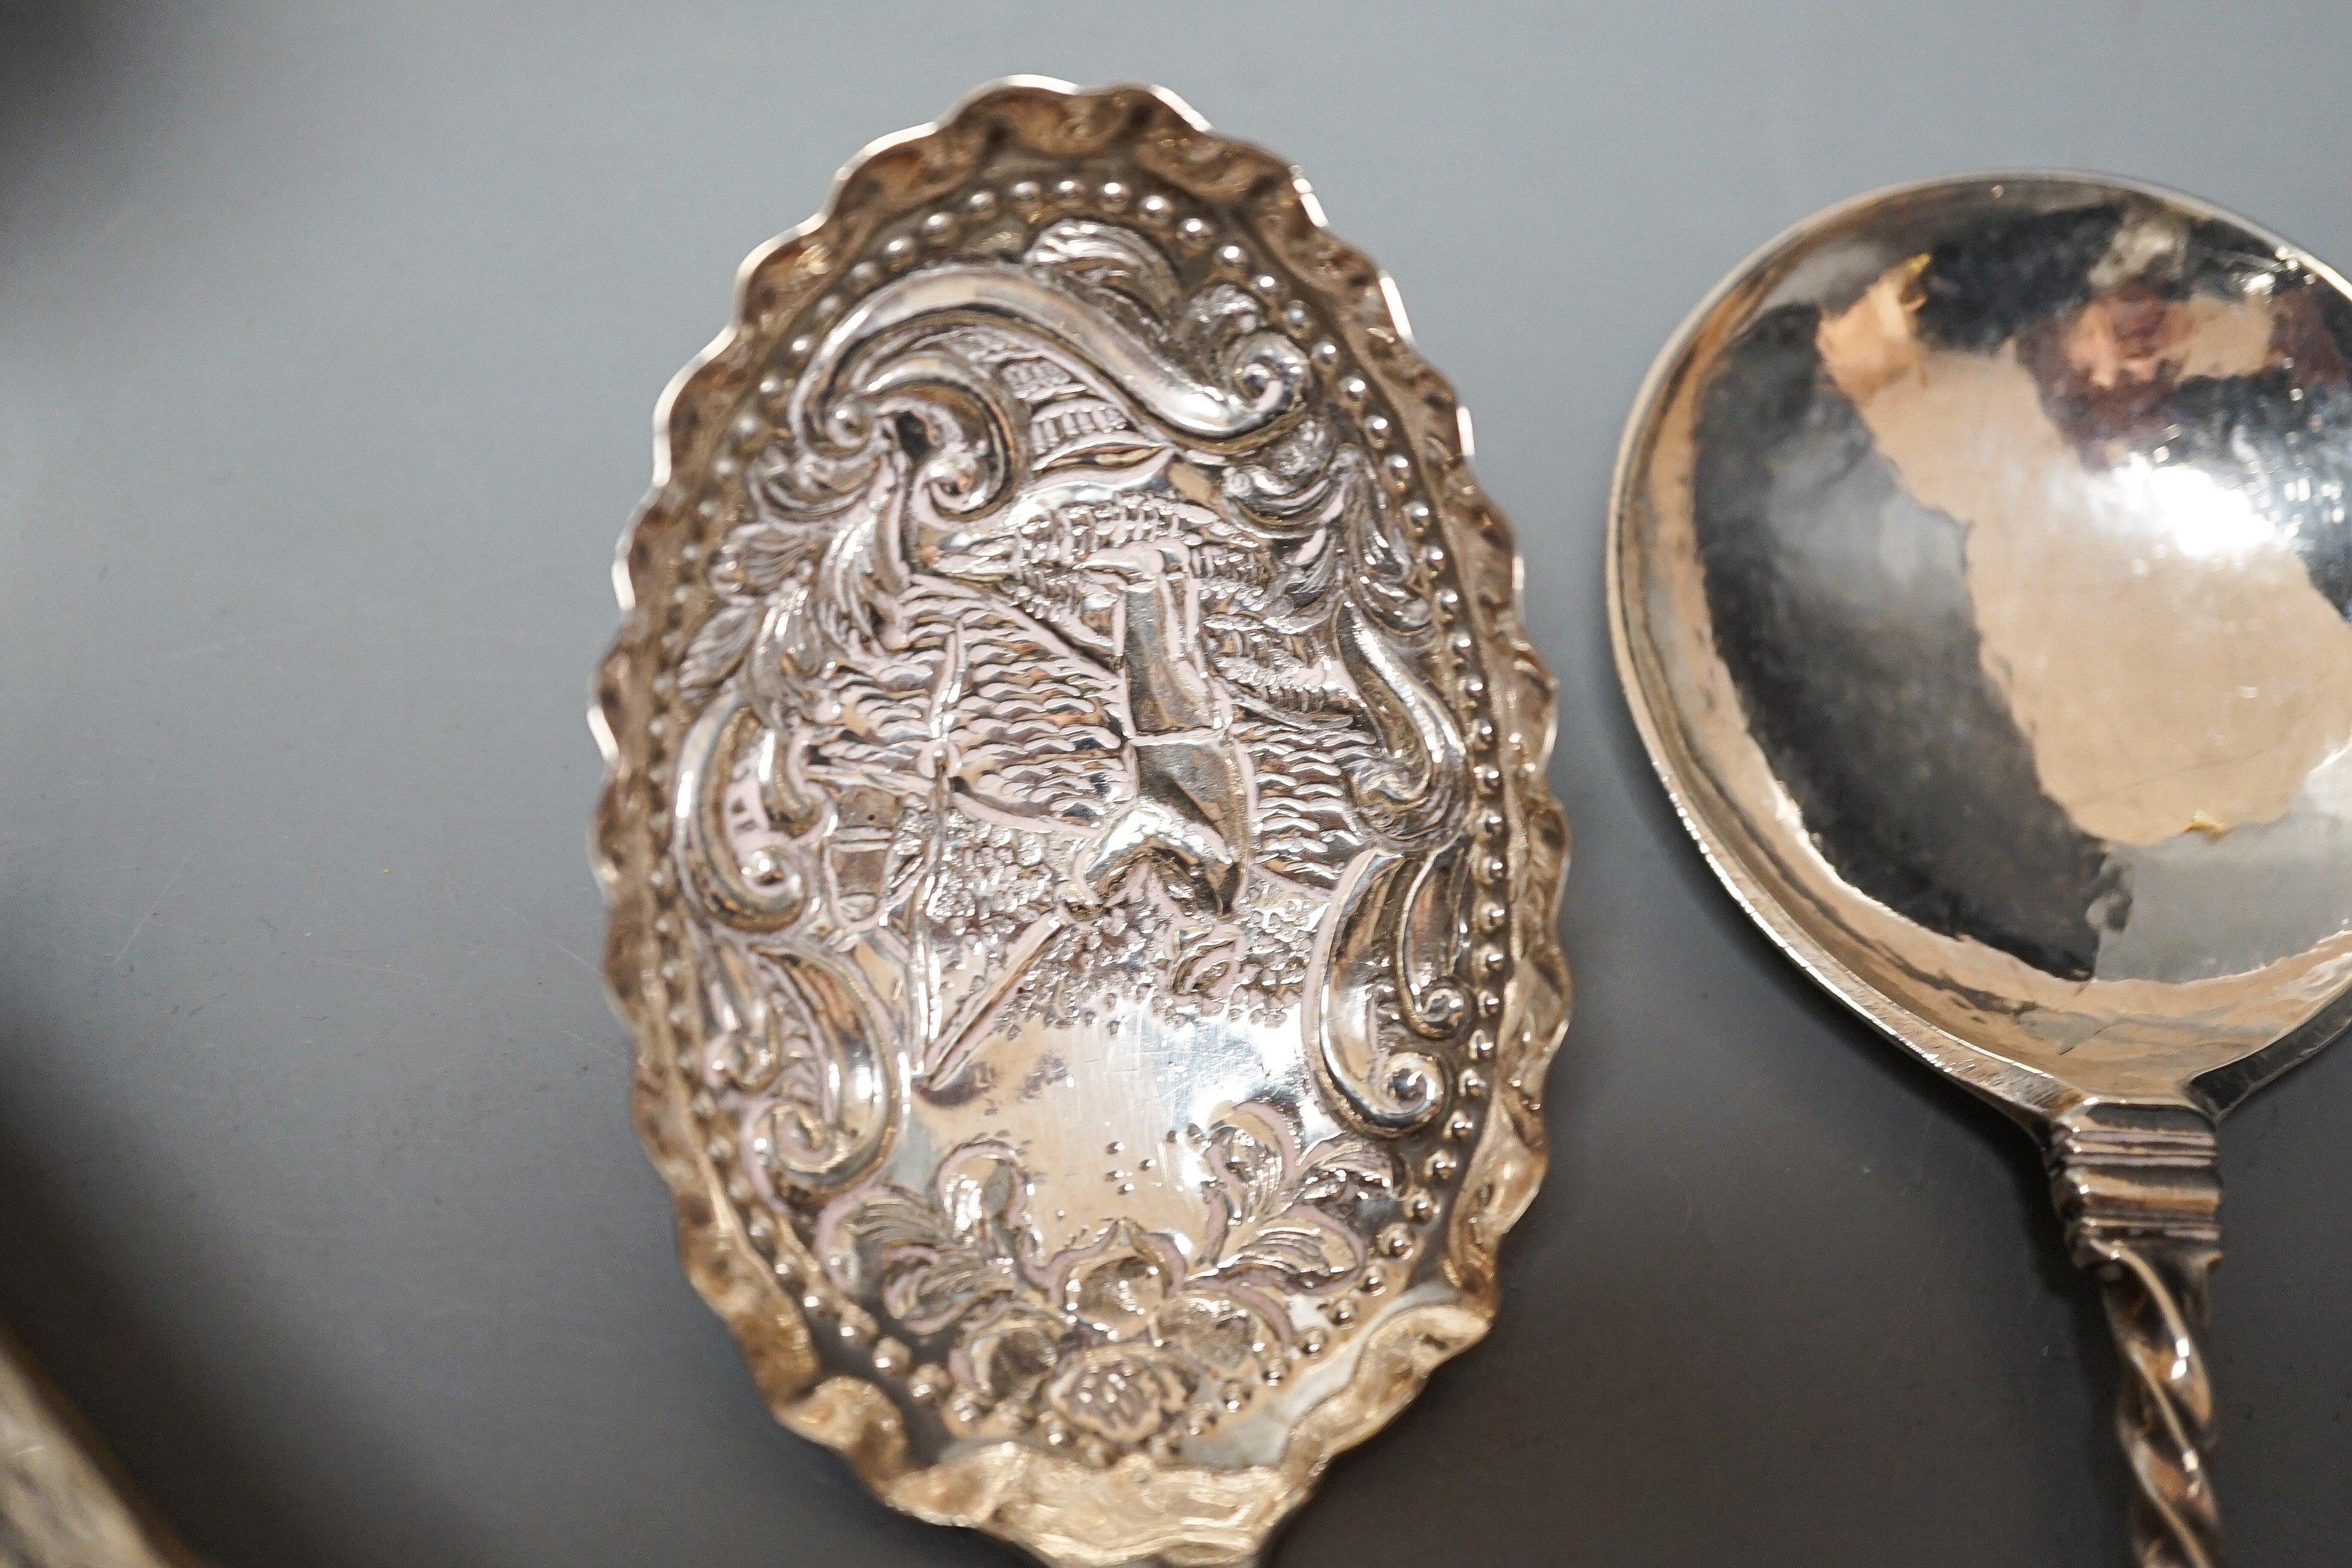 A 19th century Dutch embossed white metal spoon, 13.5cm, one other unmarked white metal spoon, a small silver posy vase and a repousse silver match sleeve.